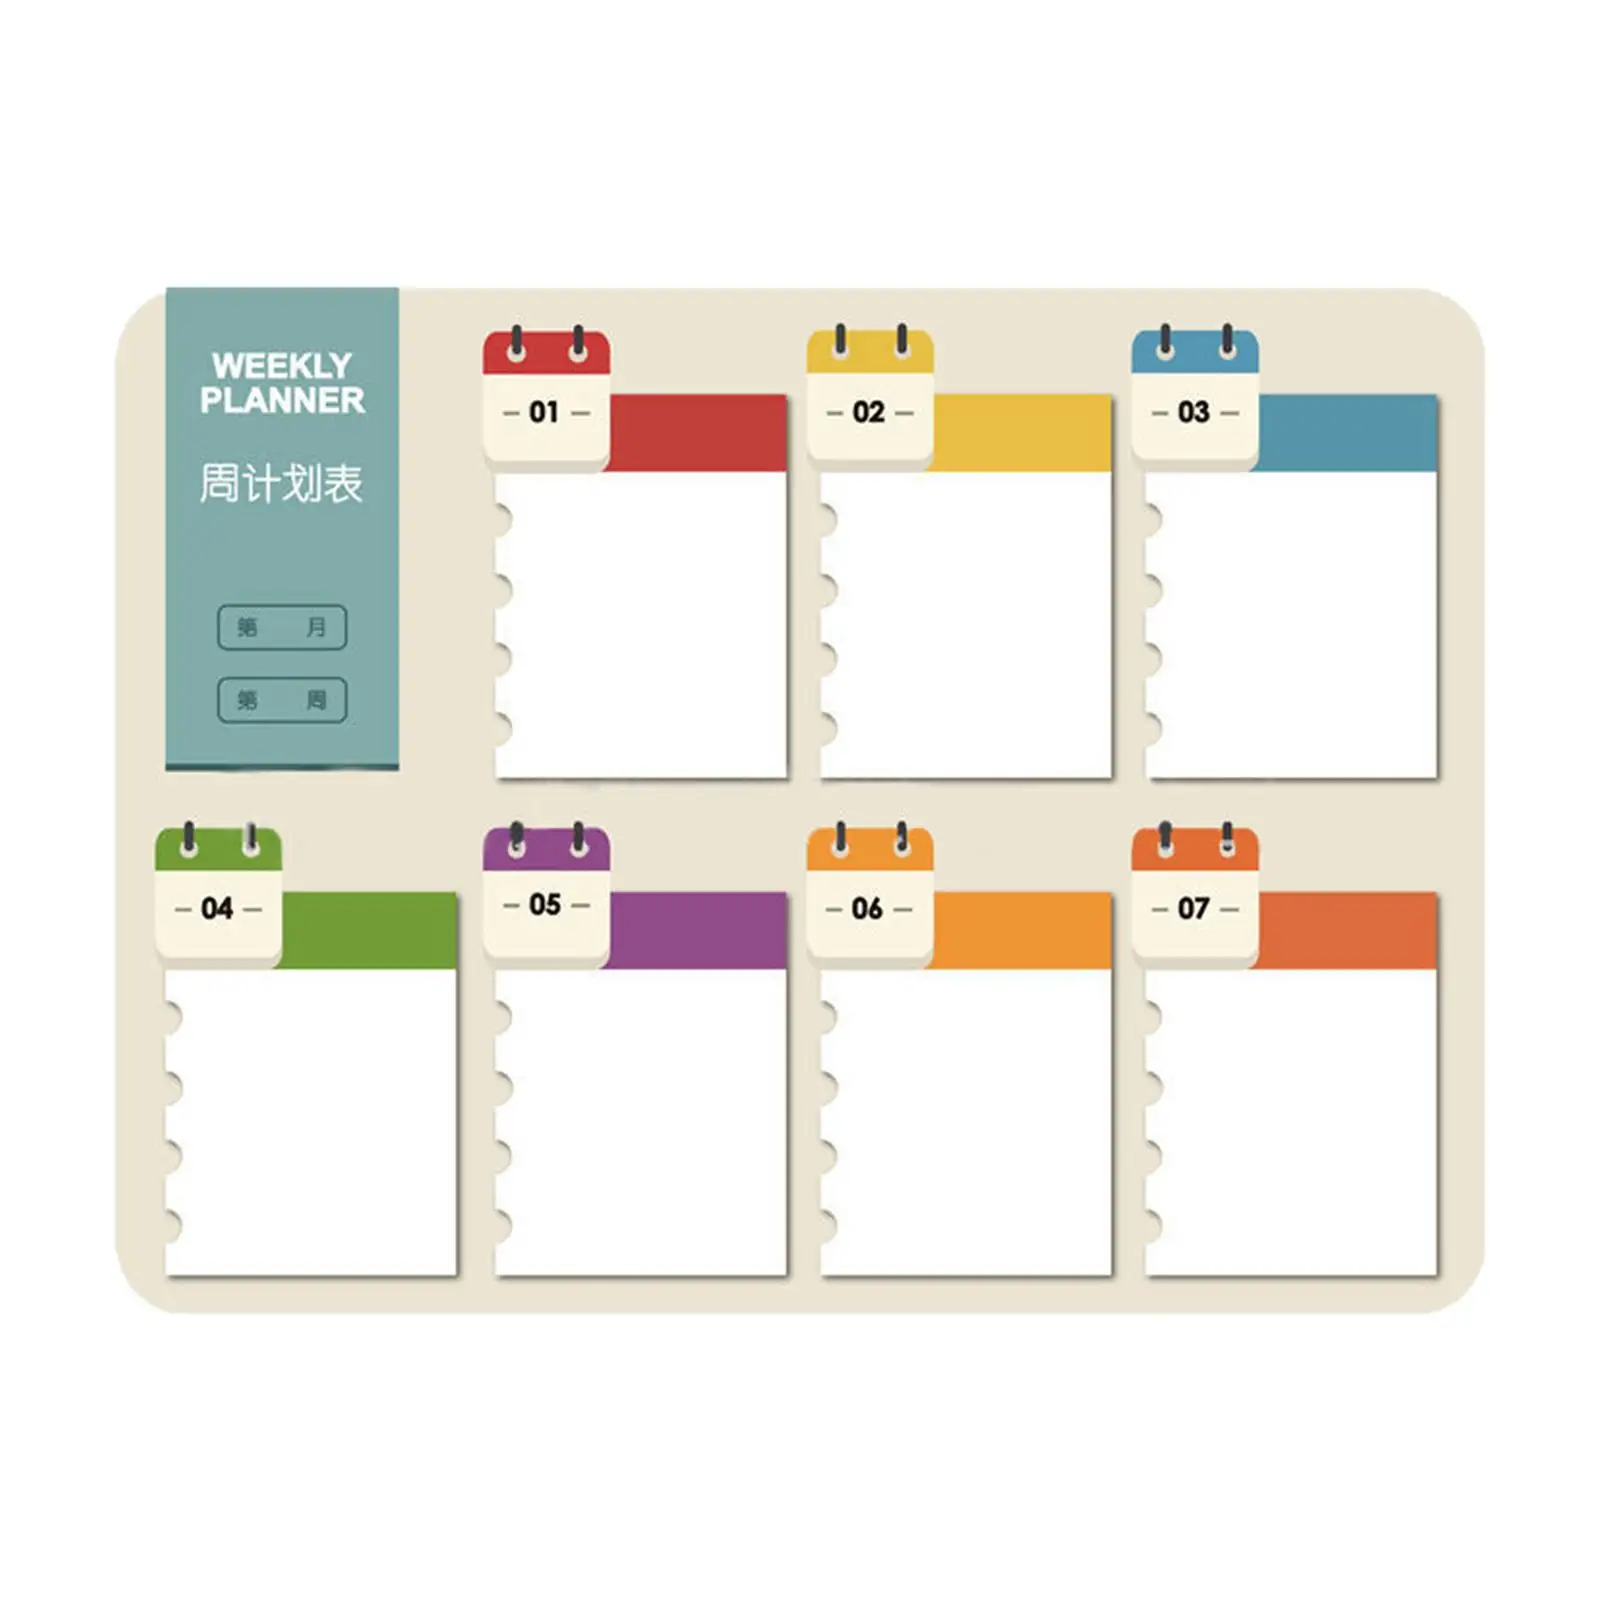 https://ae01.alicdn.com/kf/S2a47eb4773b9411d9f71c5e5fd787e67S/Weekly-Planner-with-2-Whiteboard-Markers-Planning-with-Marker-Suction-Self-Adhesive-plan-Refrigerator-Sticker.jpg